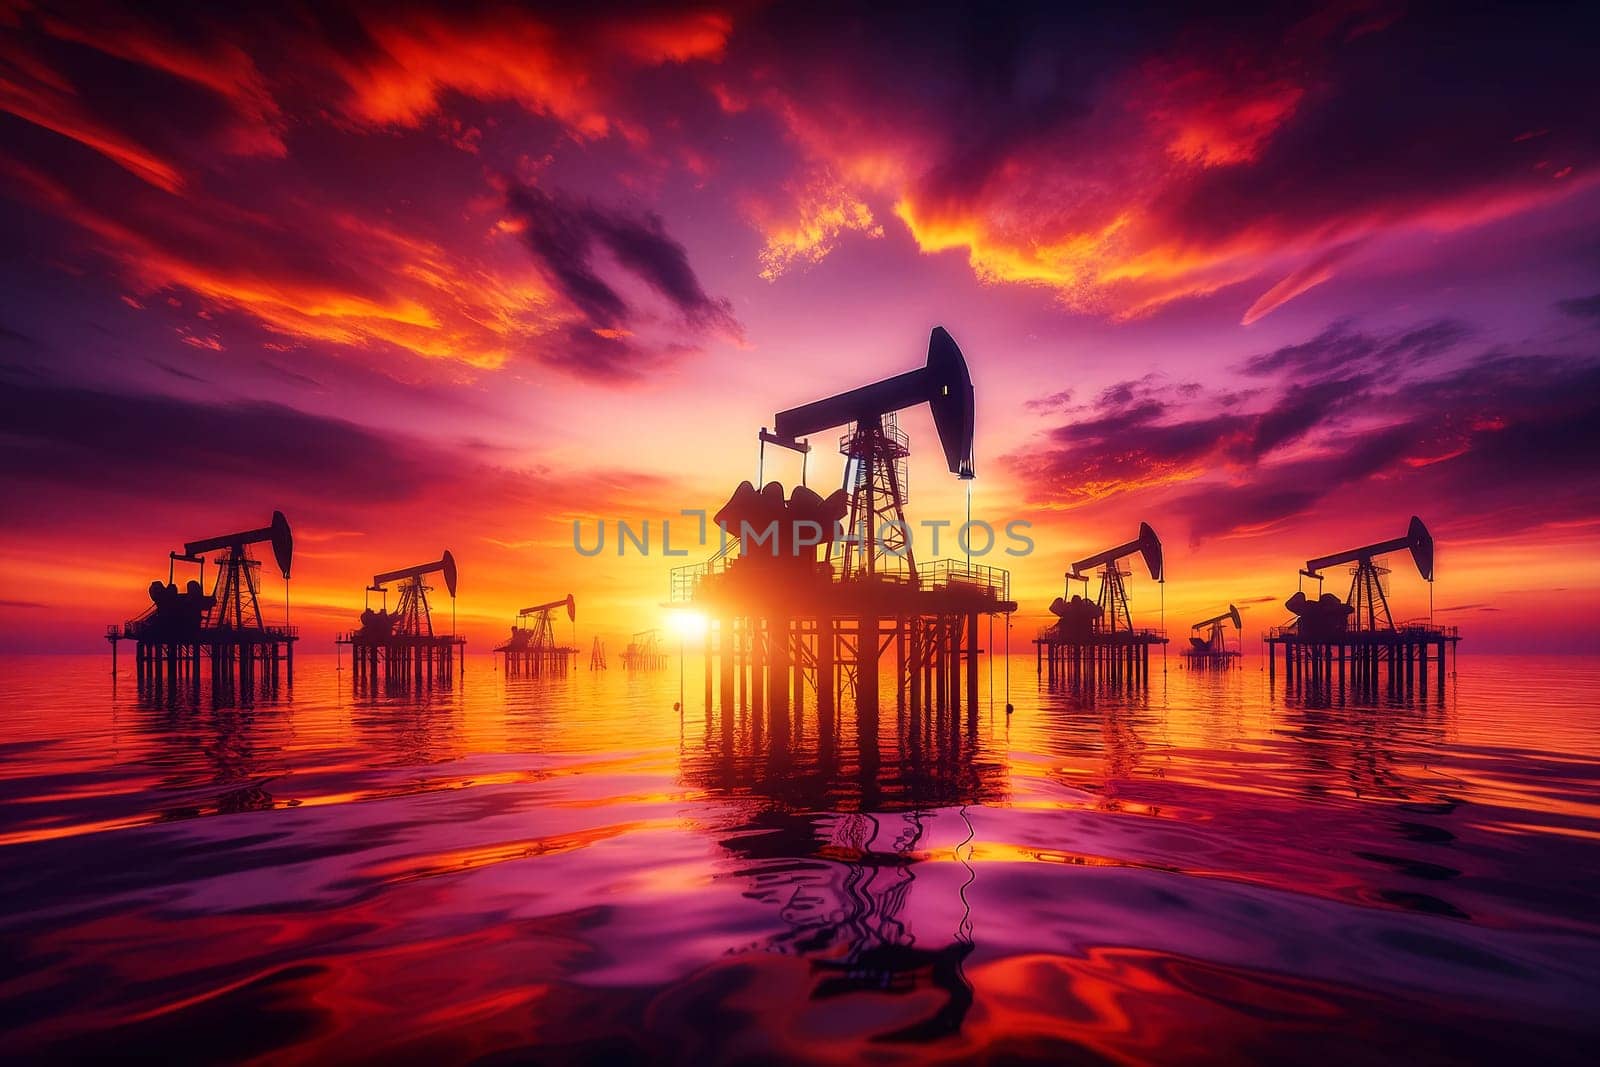 oil pump jacks in the sea against the backdrop of a bright sunset, a concept for the dramatic interaction of industrial activity and natural beauty